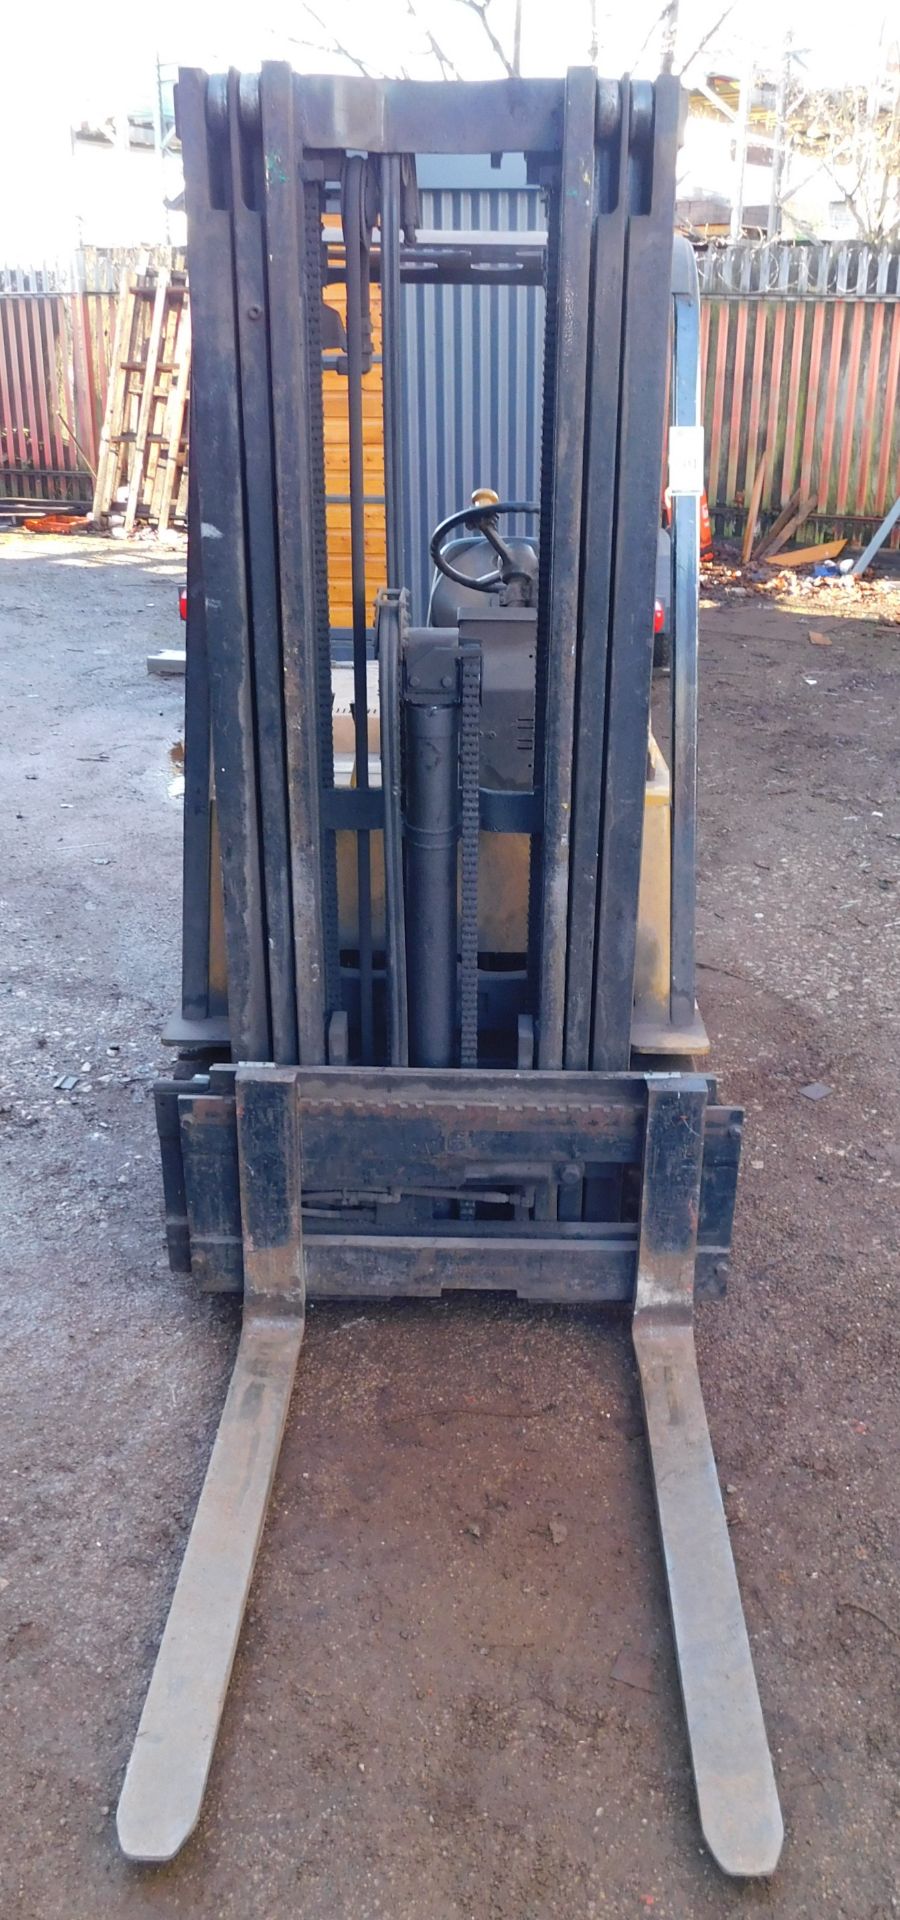 Caterpillar Model F35 Electric Forklift, Serial Number; 5EB1981, Capacity; 1750kg, 20,048 hours with - Bild 5 aus 16